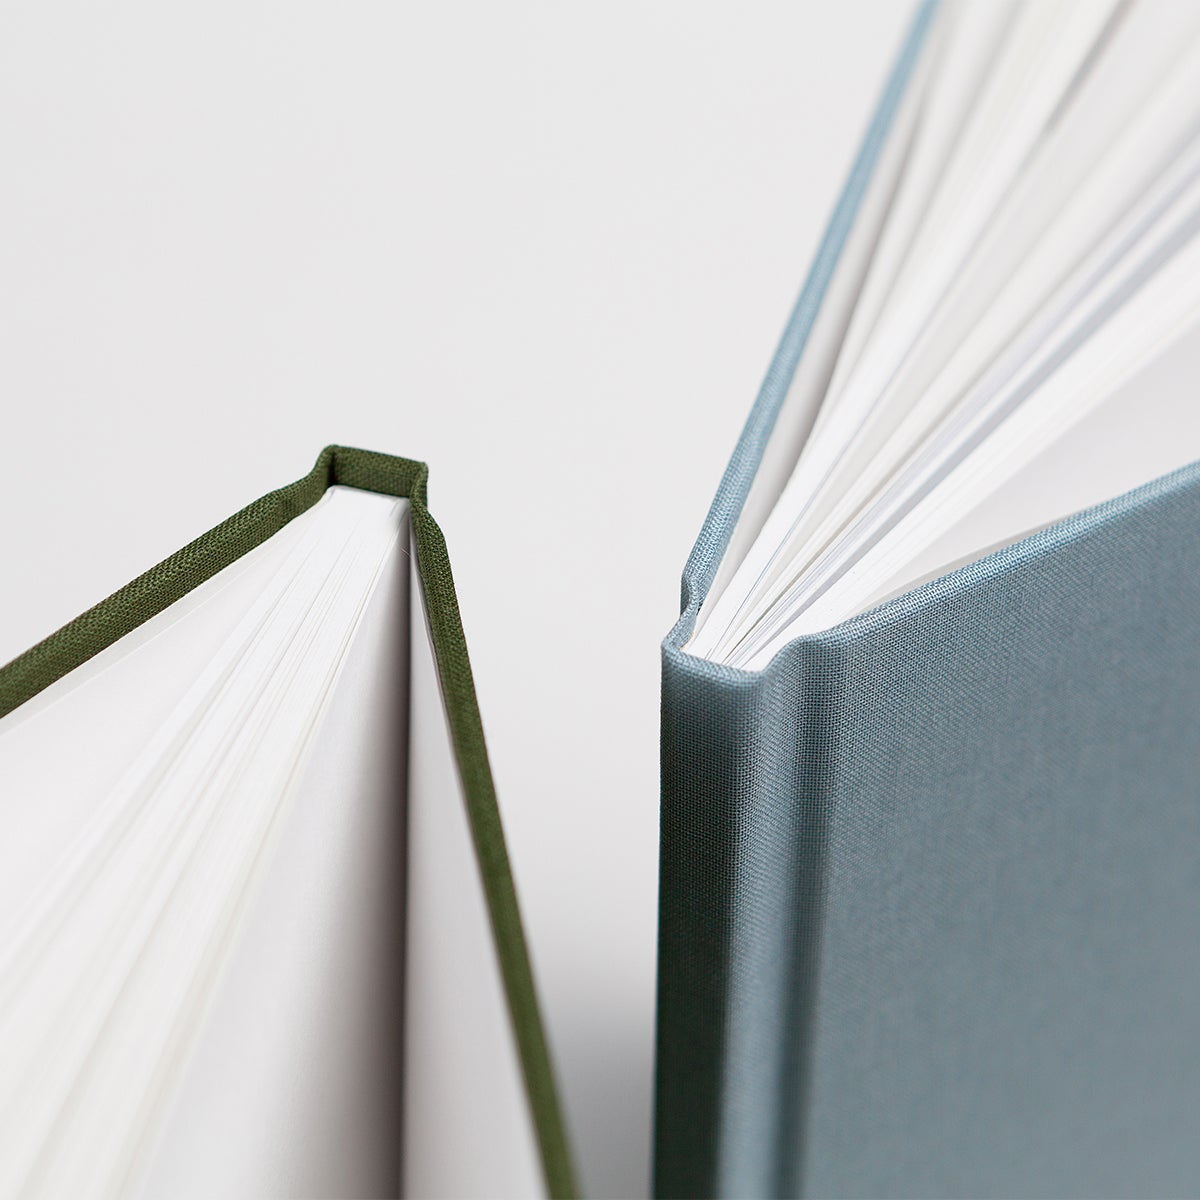 Close up image of hardcover photo book binding